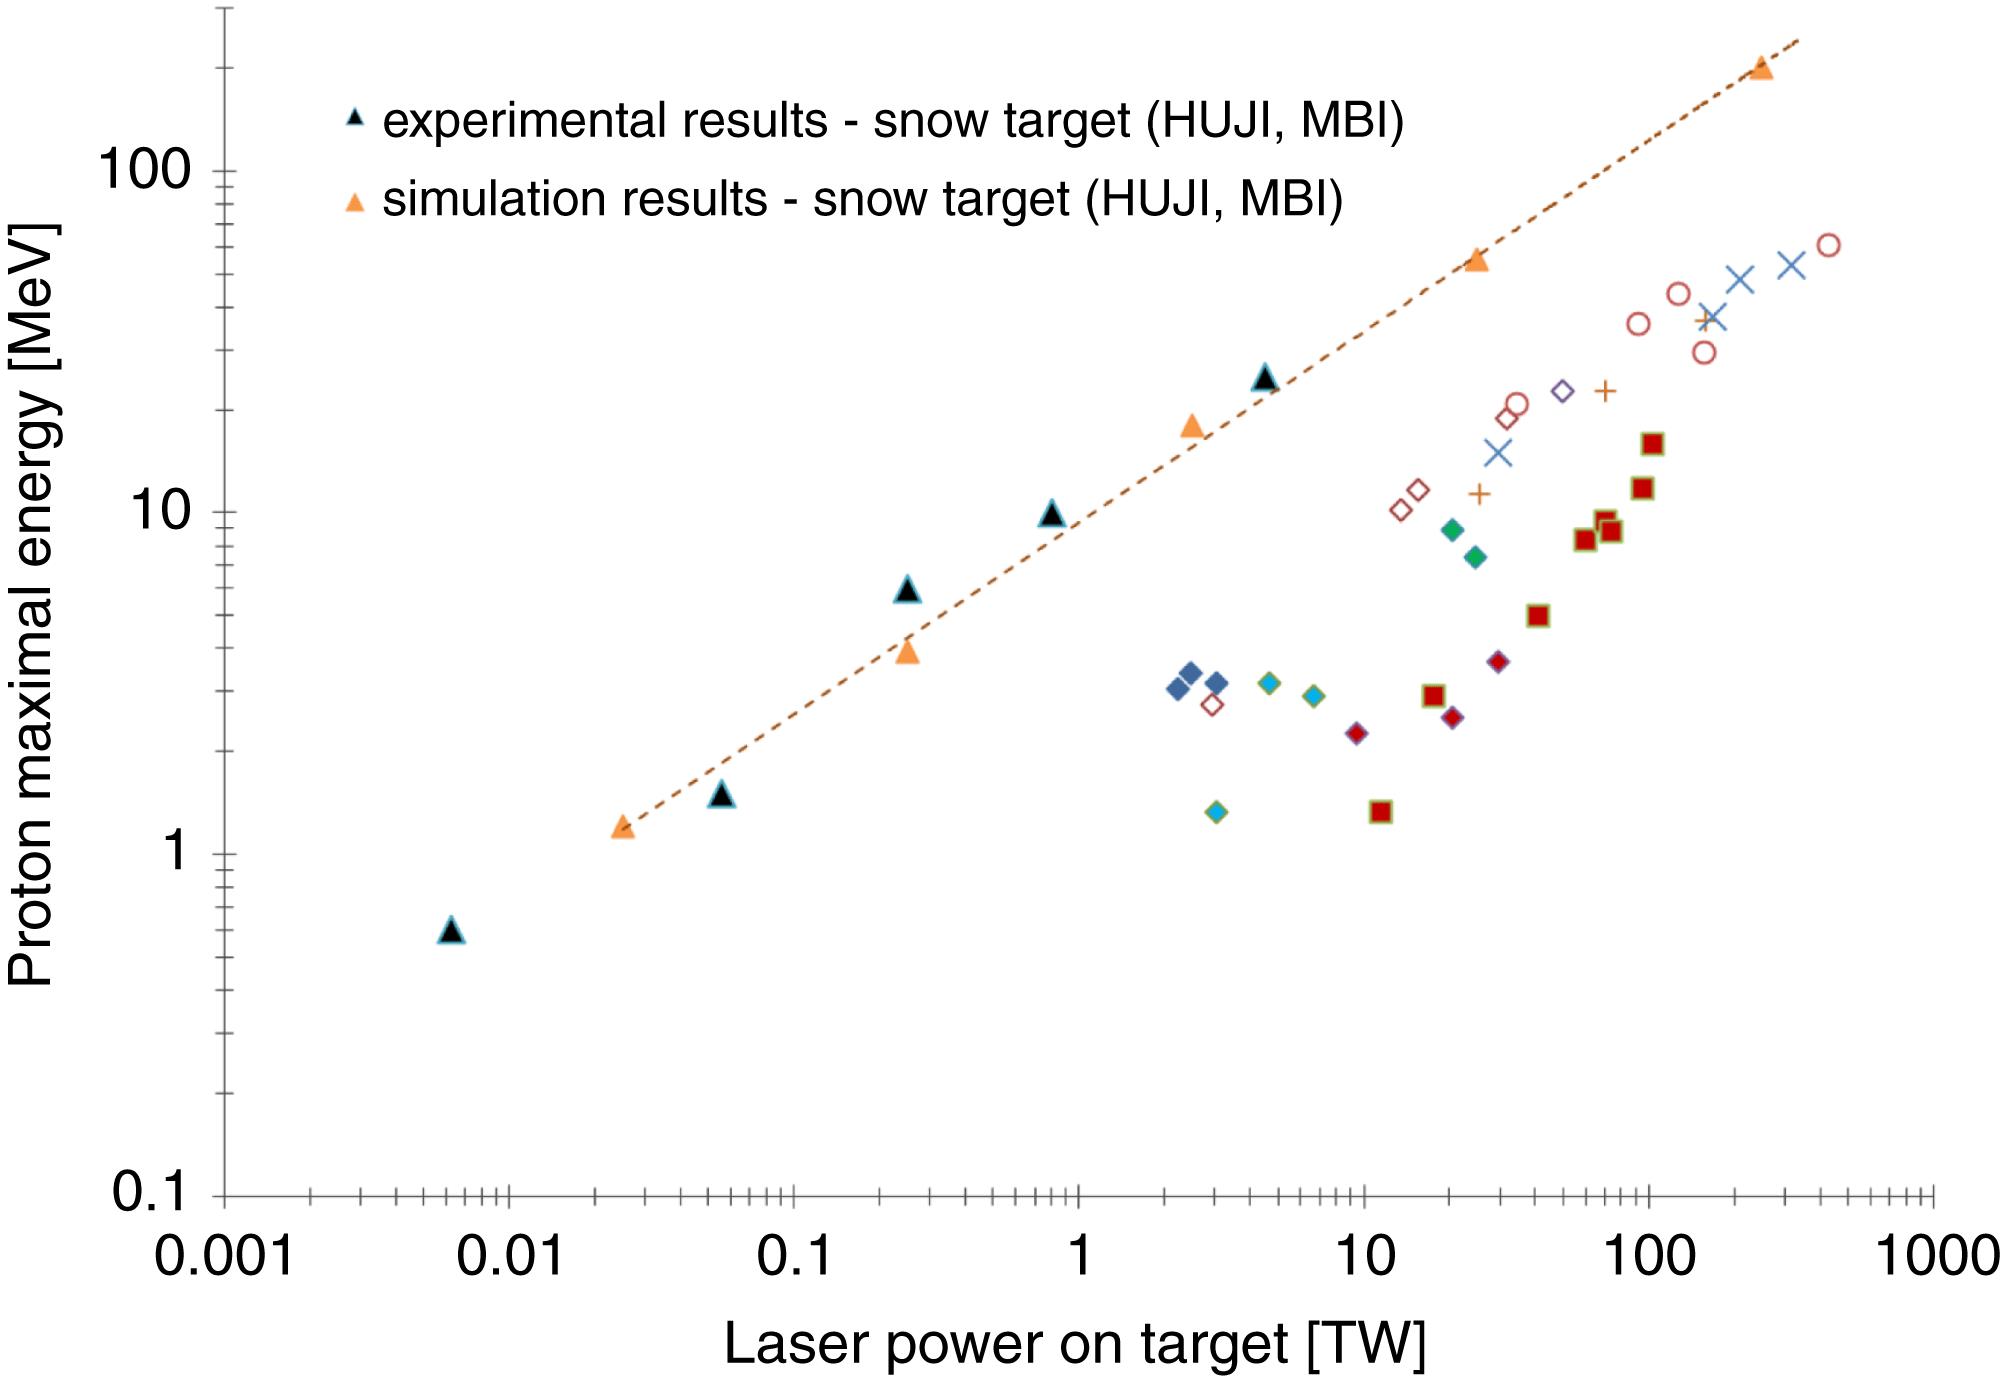 Proton maximal energy as a function of laser power the on target (triangles: snow target experimental and simulation results)[8–10]; other shapes: different targets and laser facilities)[11].